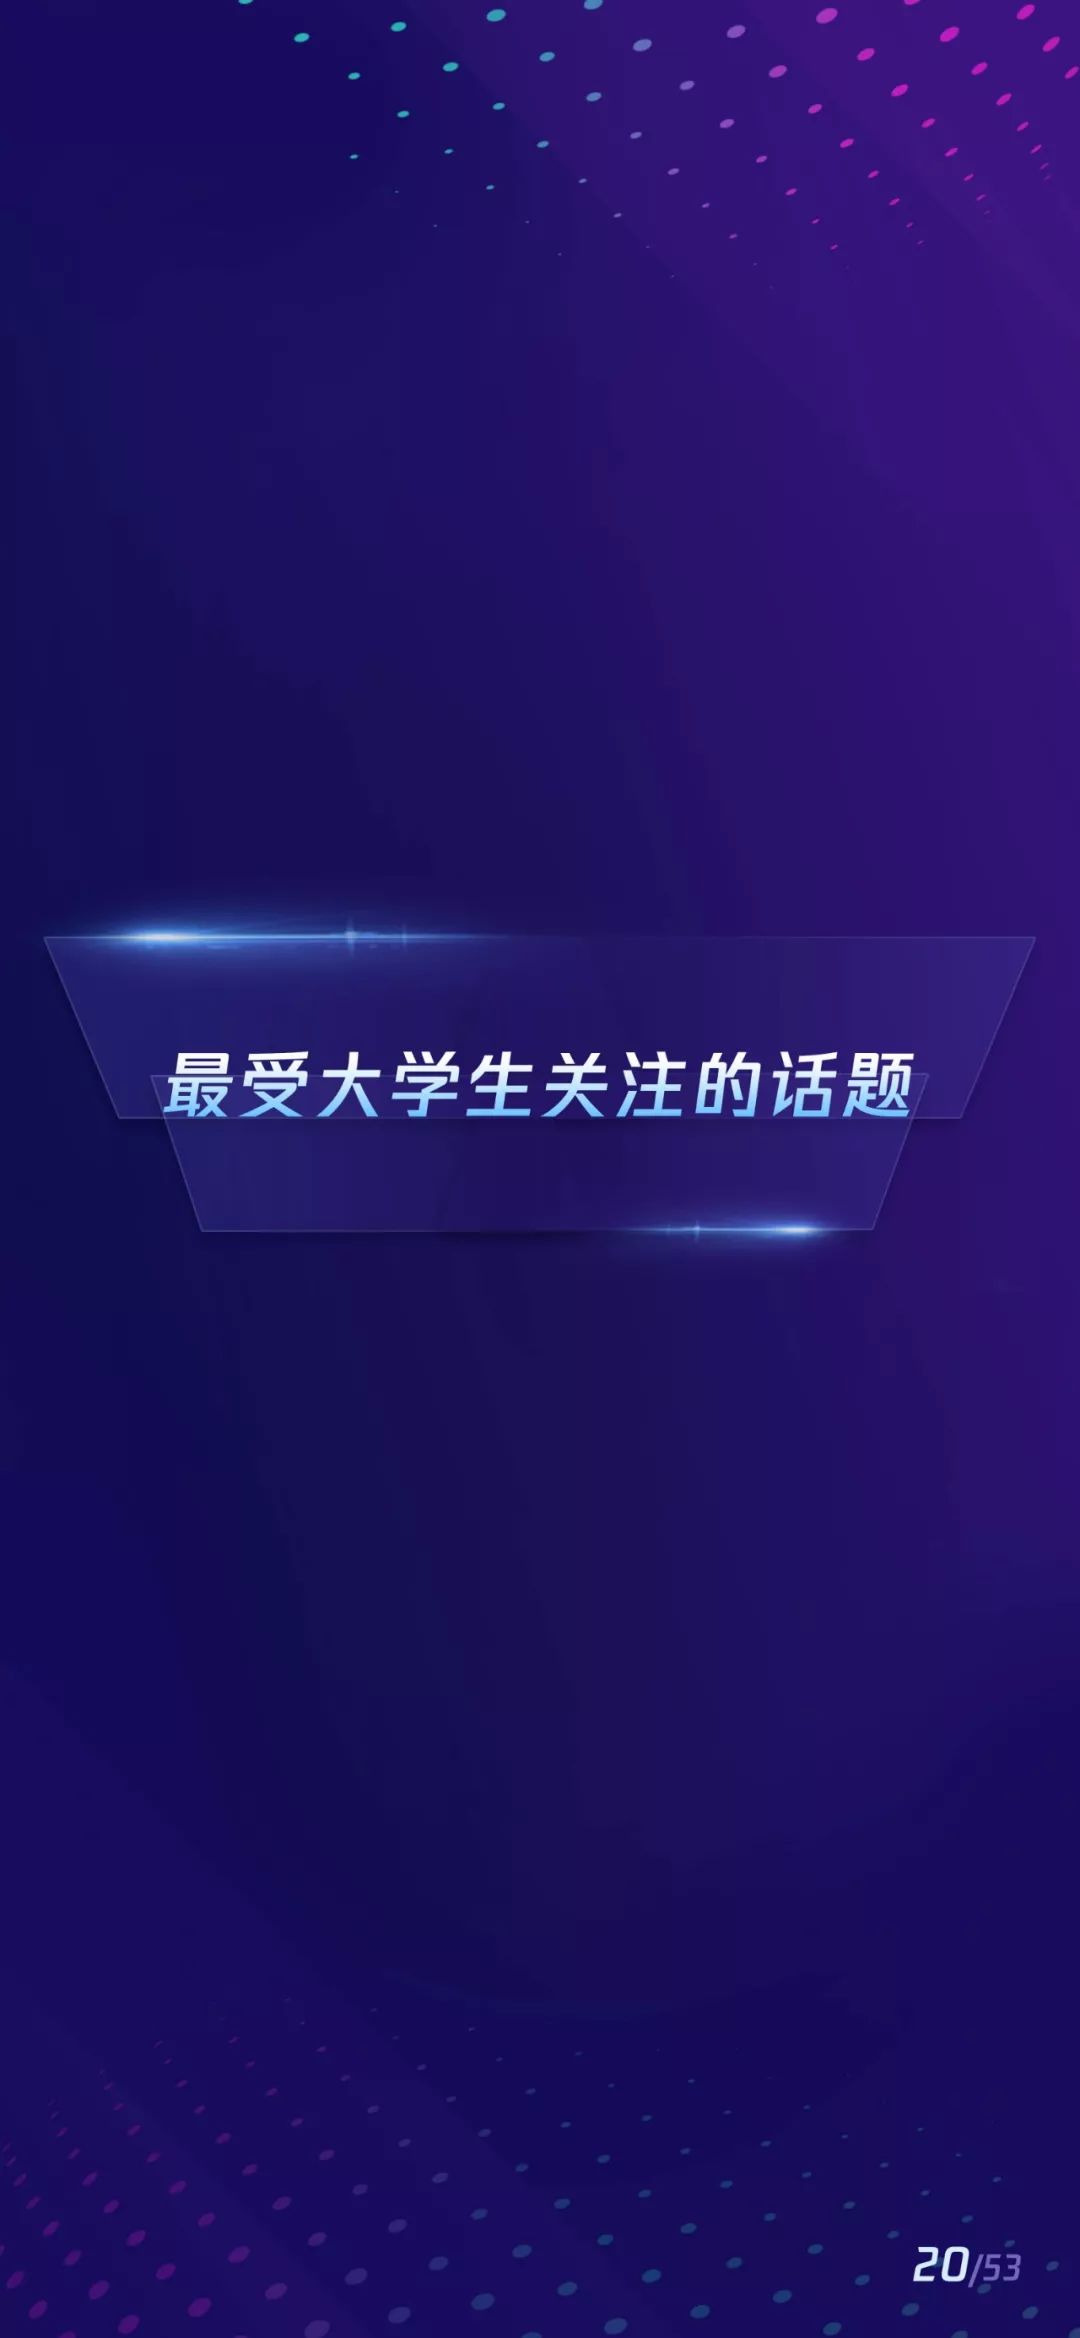 Tencent News ConTech Data Labs Releases New Education Content Distribution Report for 2019